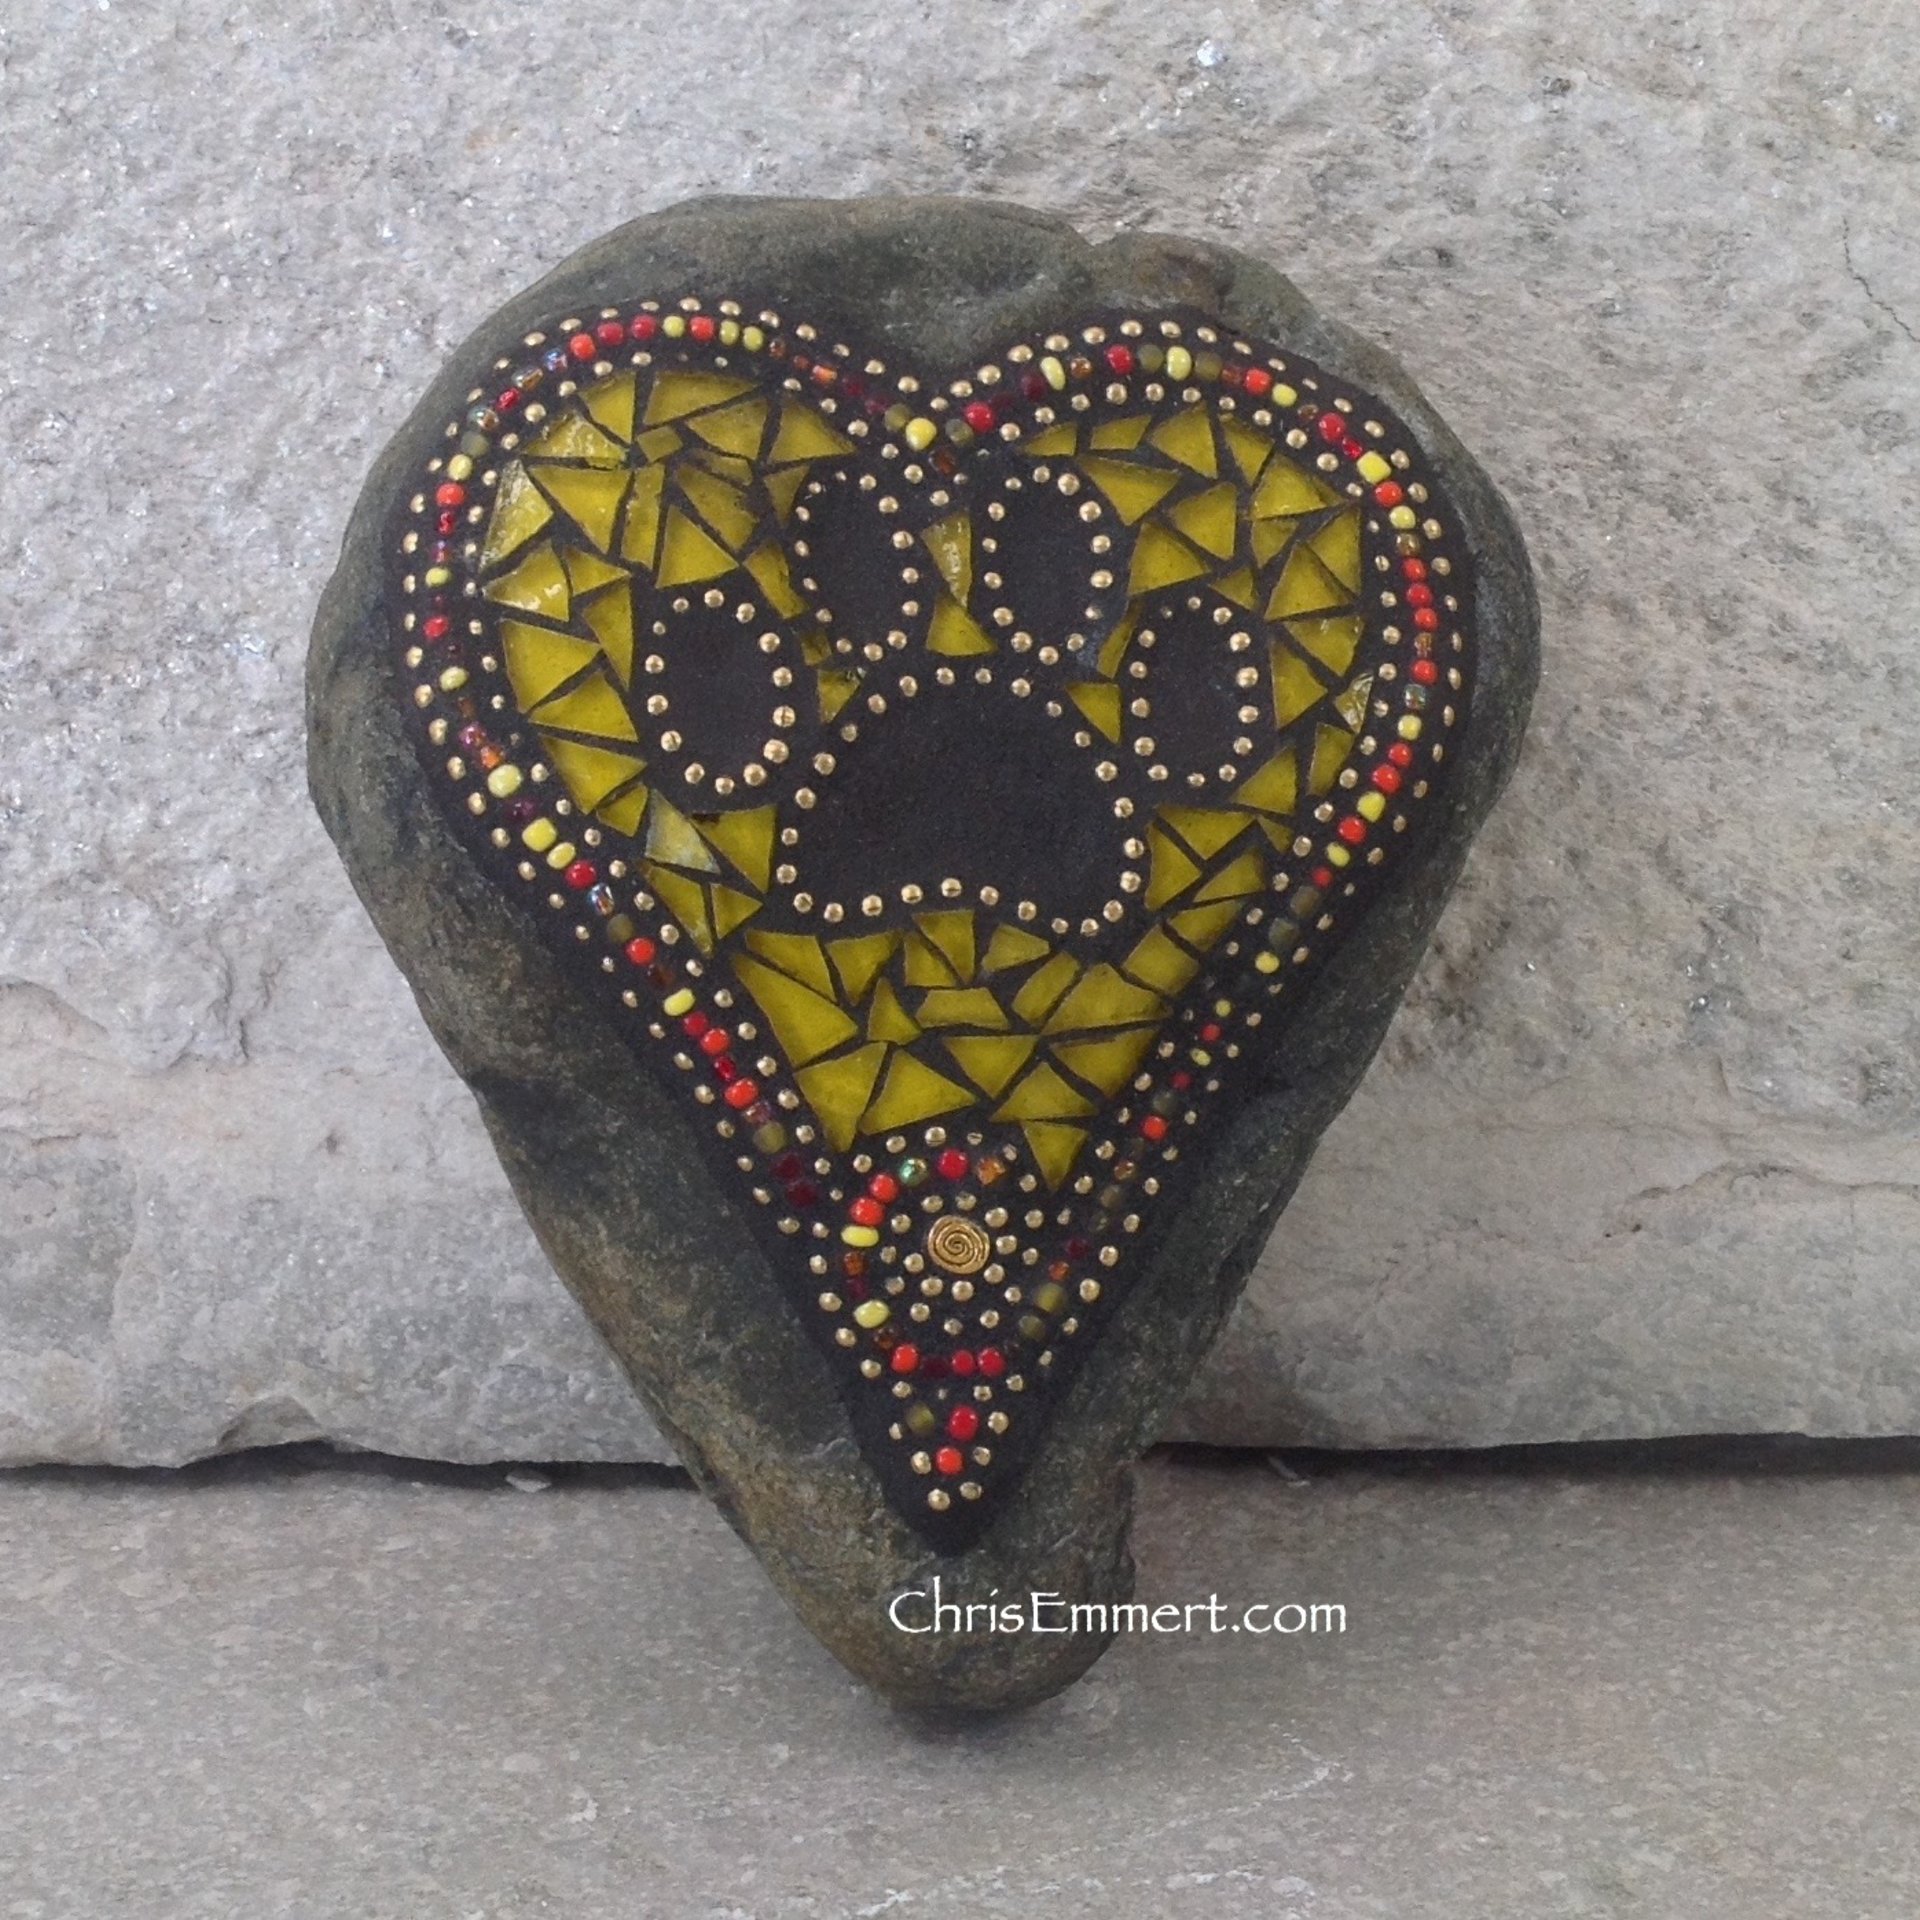 Get a Custom Heart with a Paw Print - Garden Stone